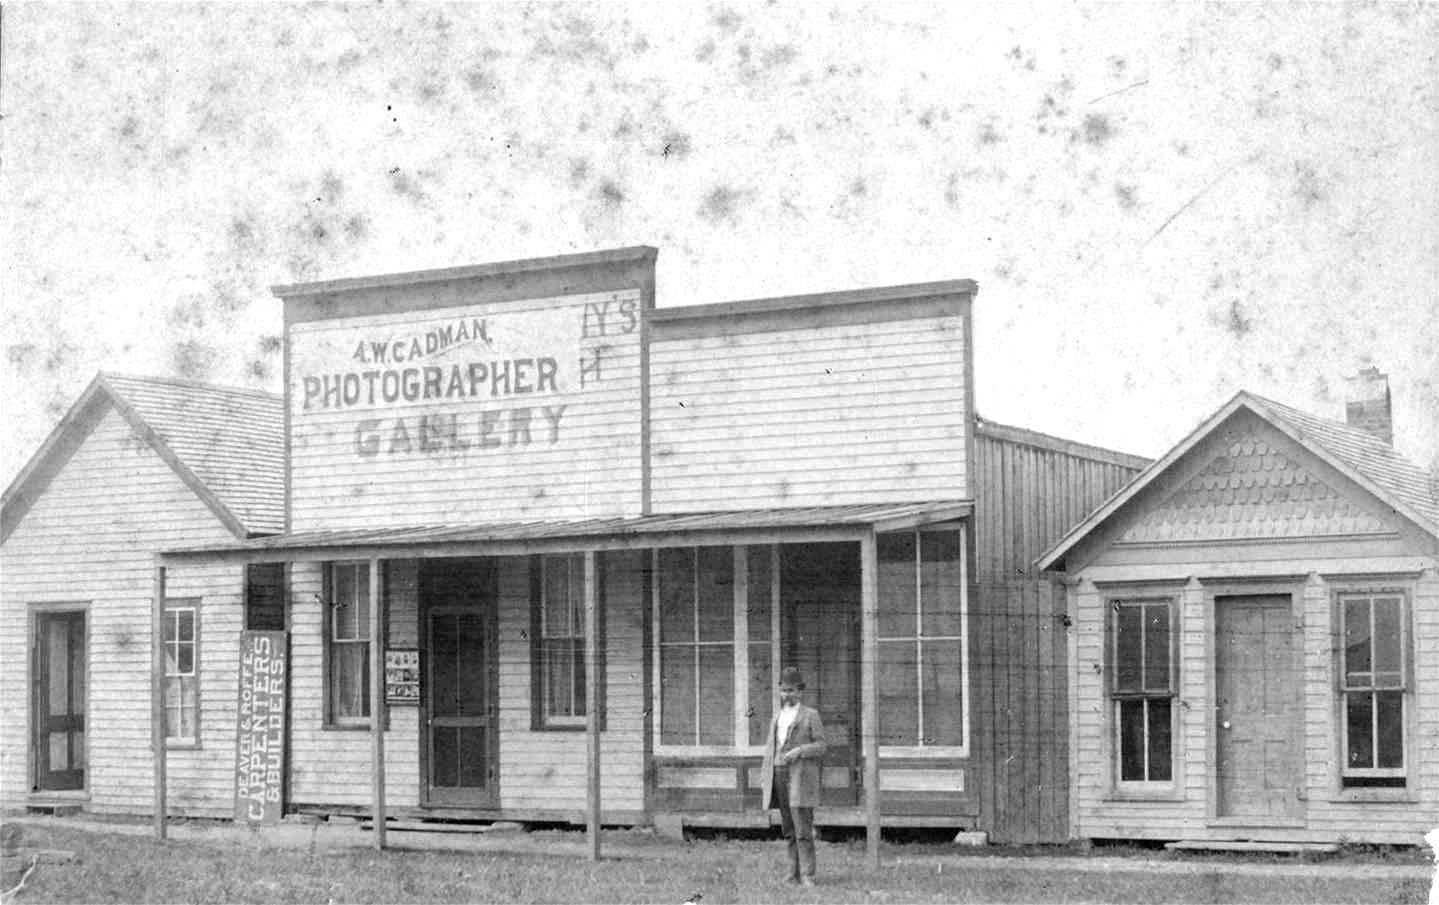 Storefront with porch "A. W. Cadman Photographer Gallery"